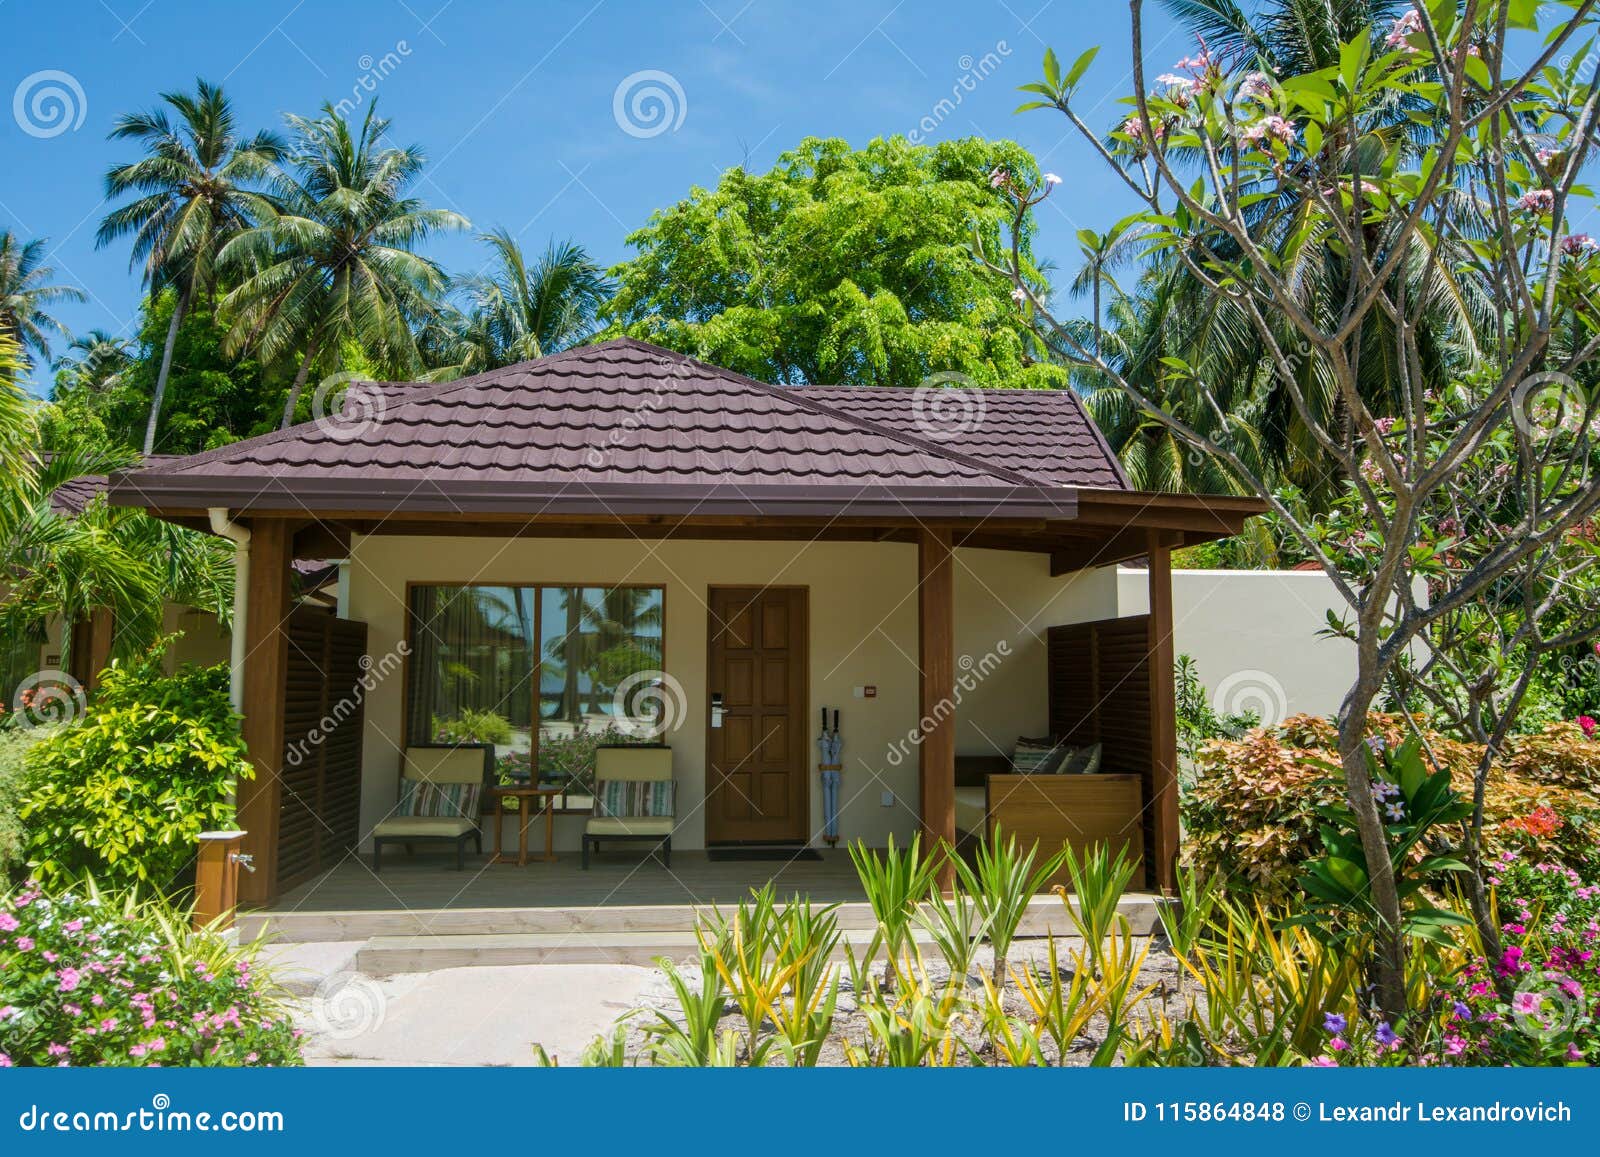 Luxury Beautiful Small House on the Beach Located at the Tropical ...